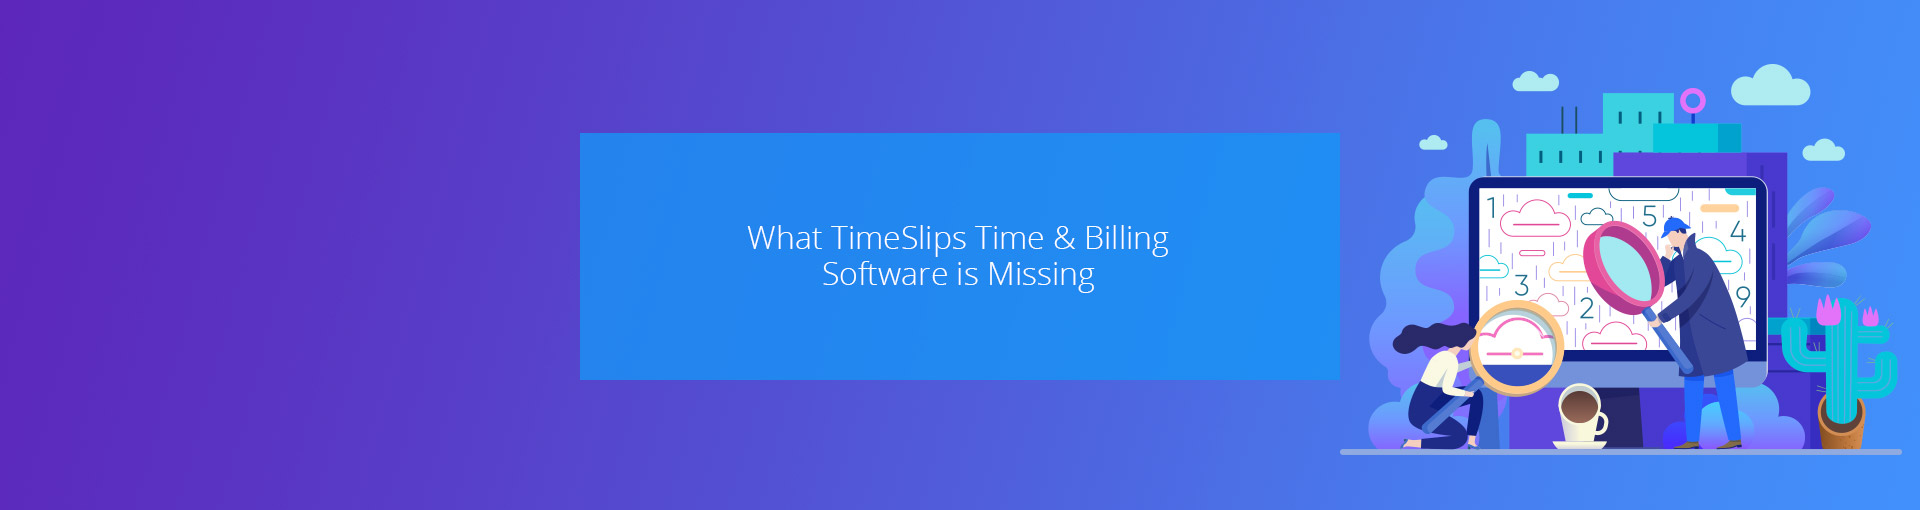 What TimeSlips Time & Billing Software is Missing Featured Image